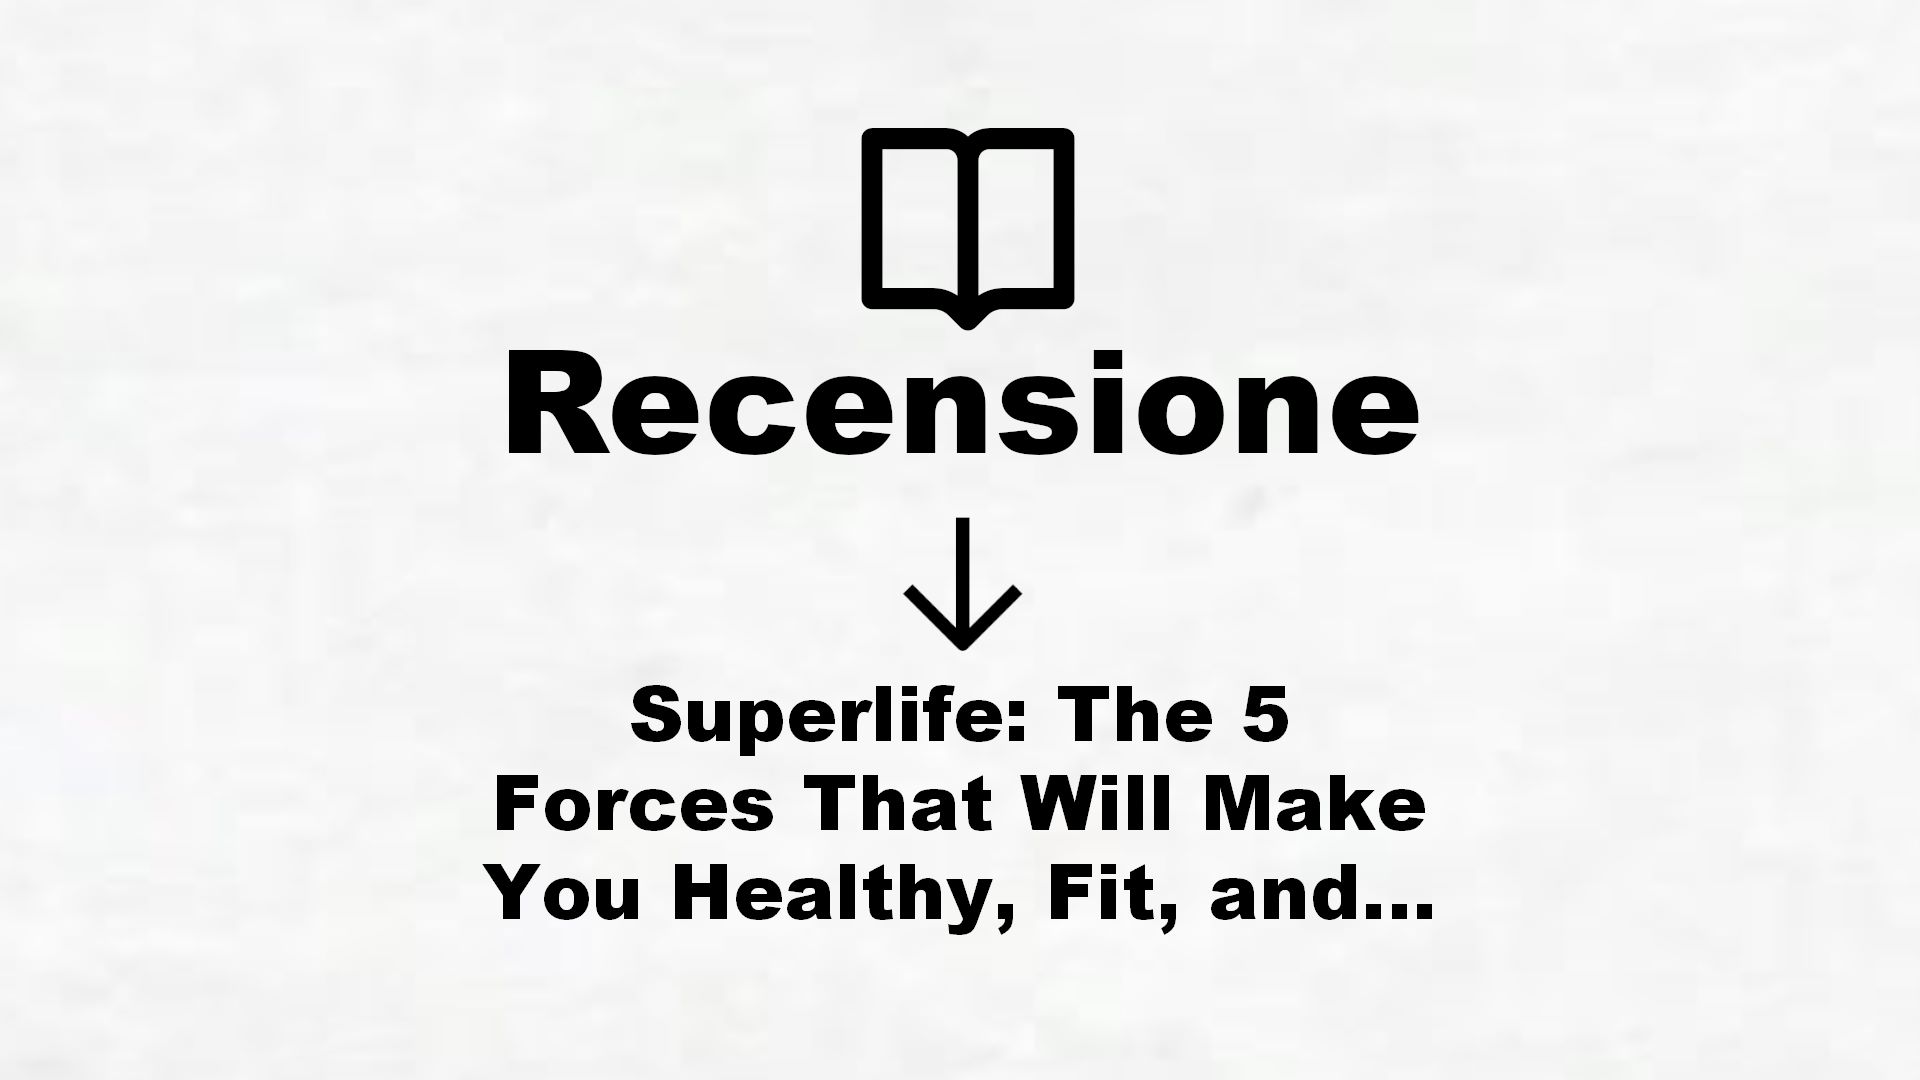 Superlife: The 5 Forces That Will Make You Healthy, Fit, and Eternally Awesome – Recensione Libro